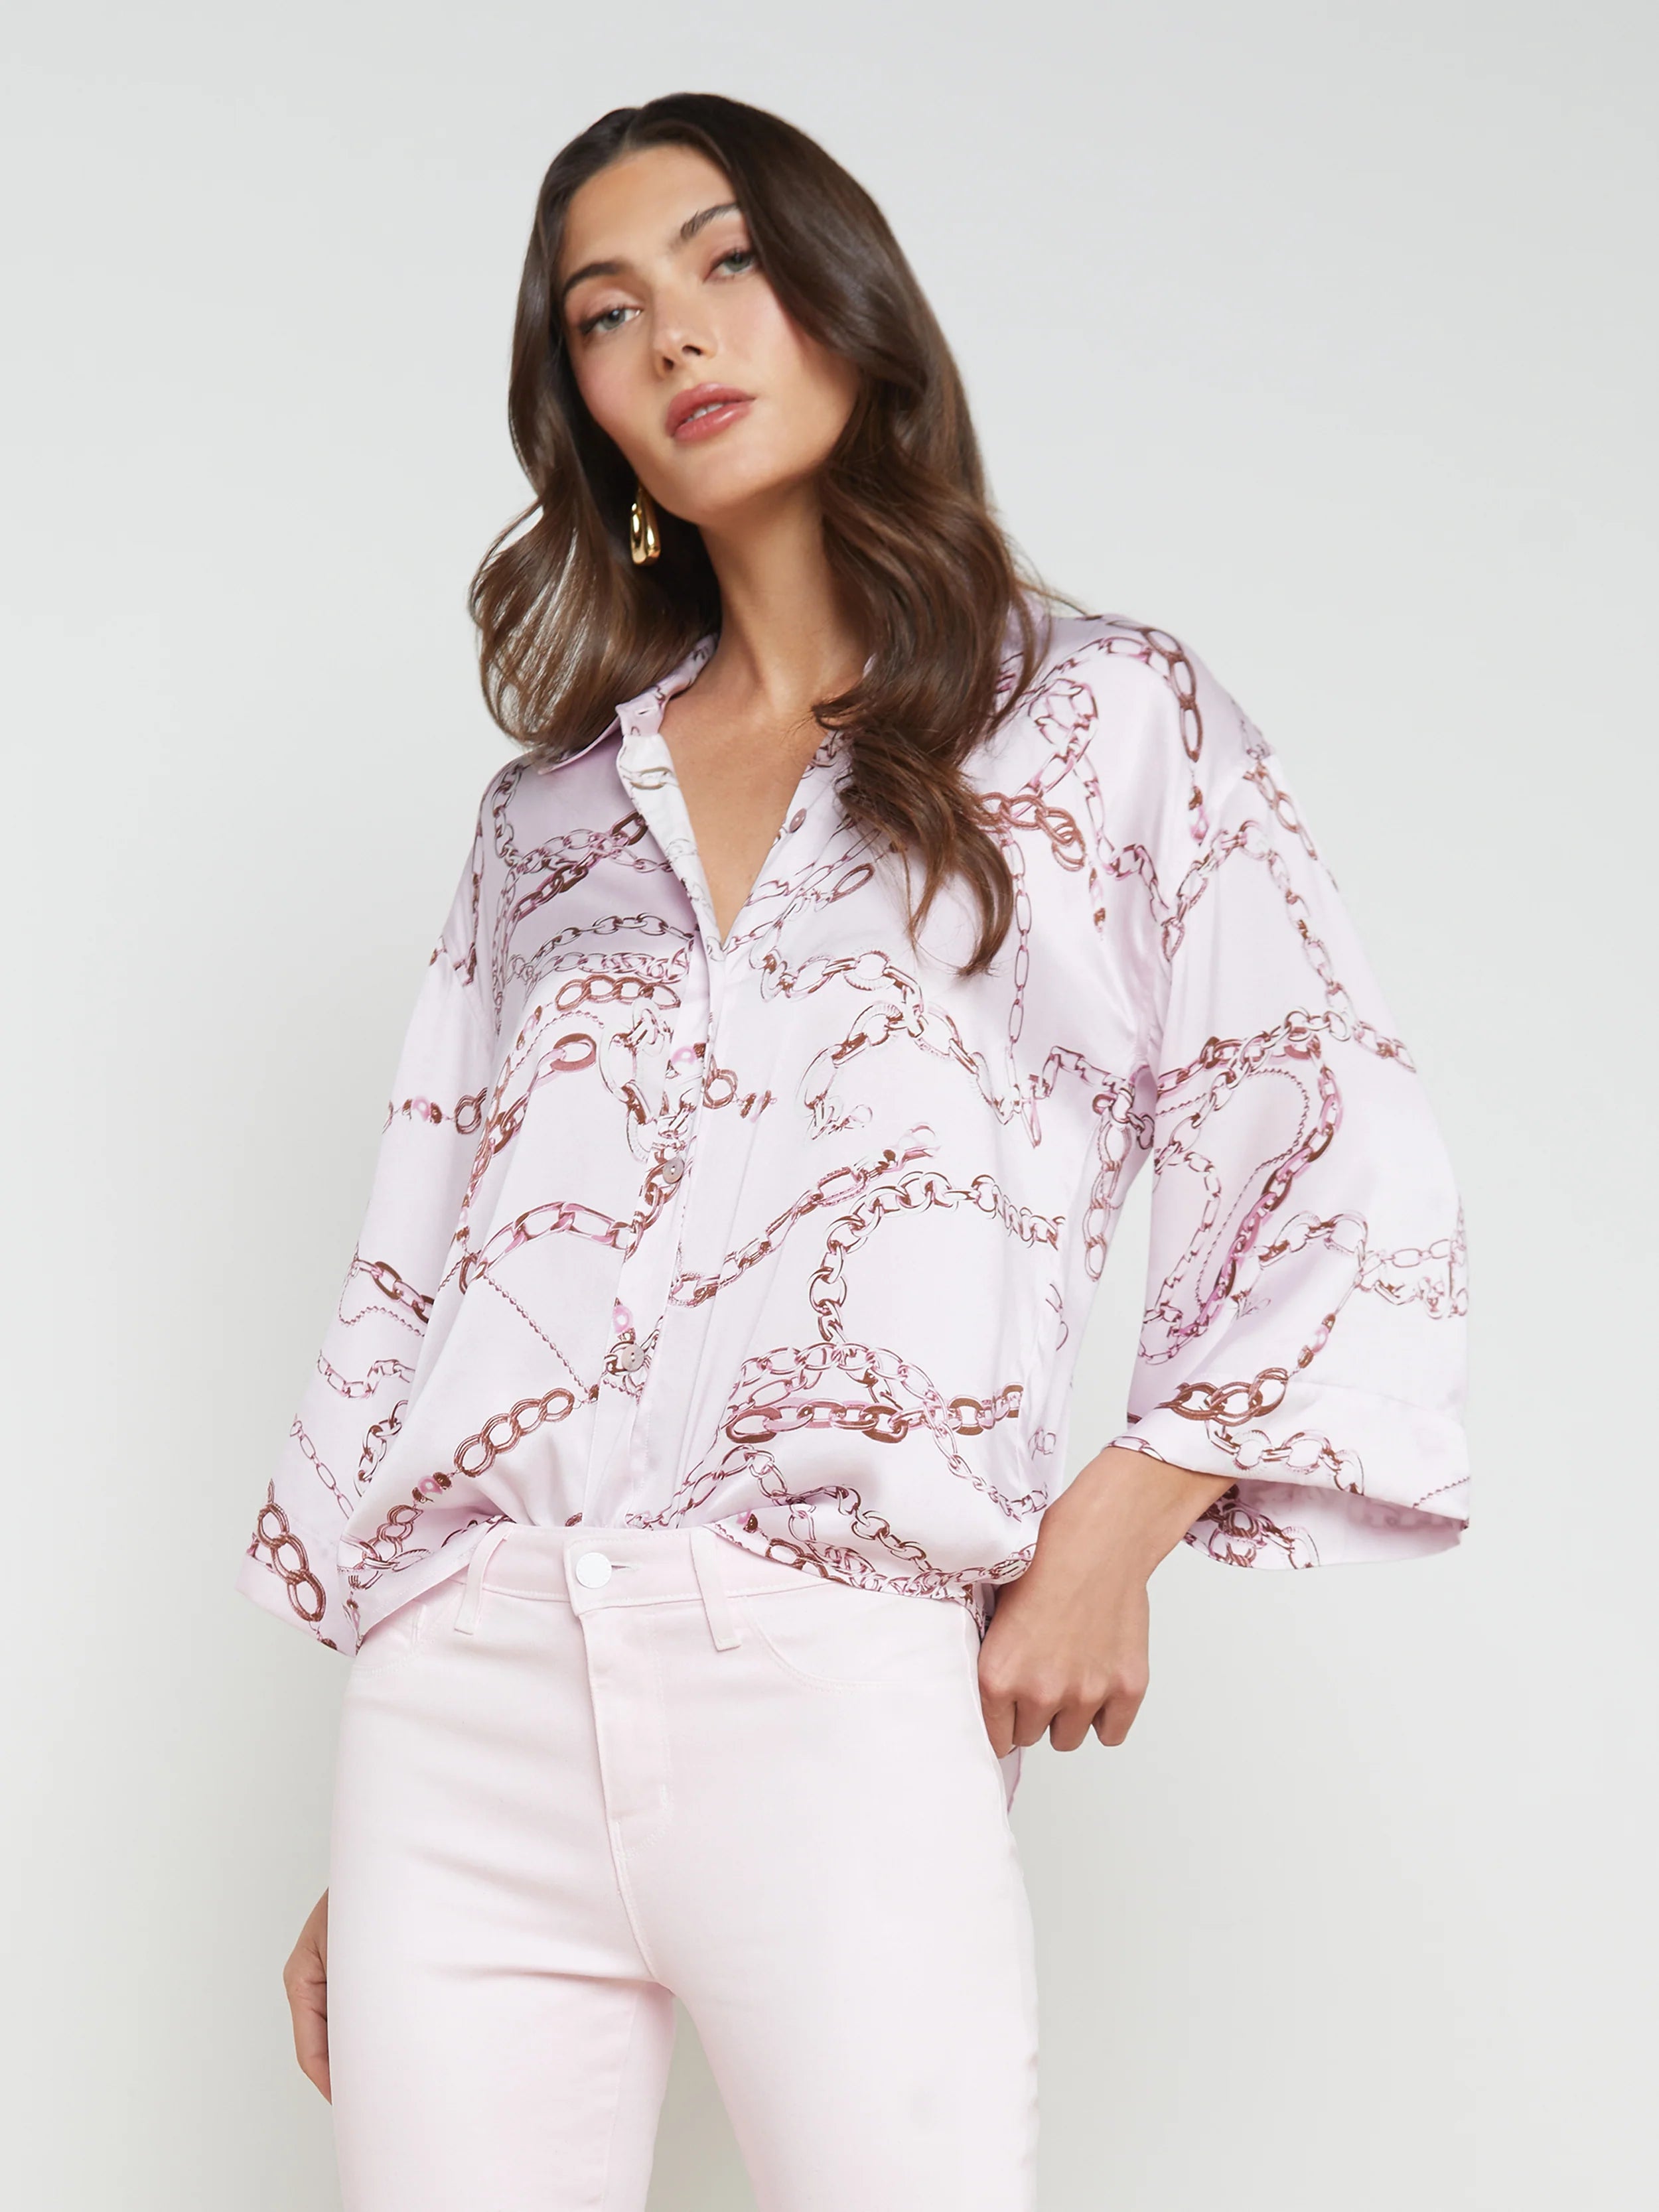 Patrice Short Sleeve Blouse in Lilac Snow Multi Sketch Chain